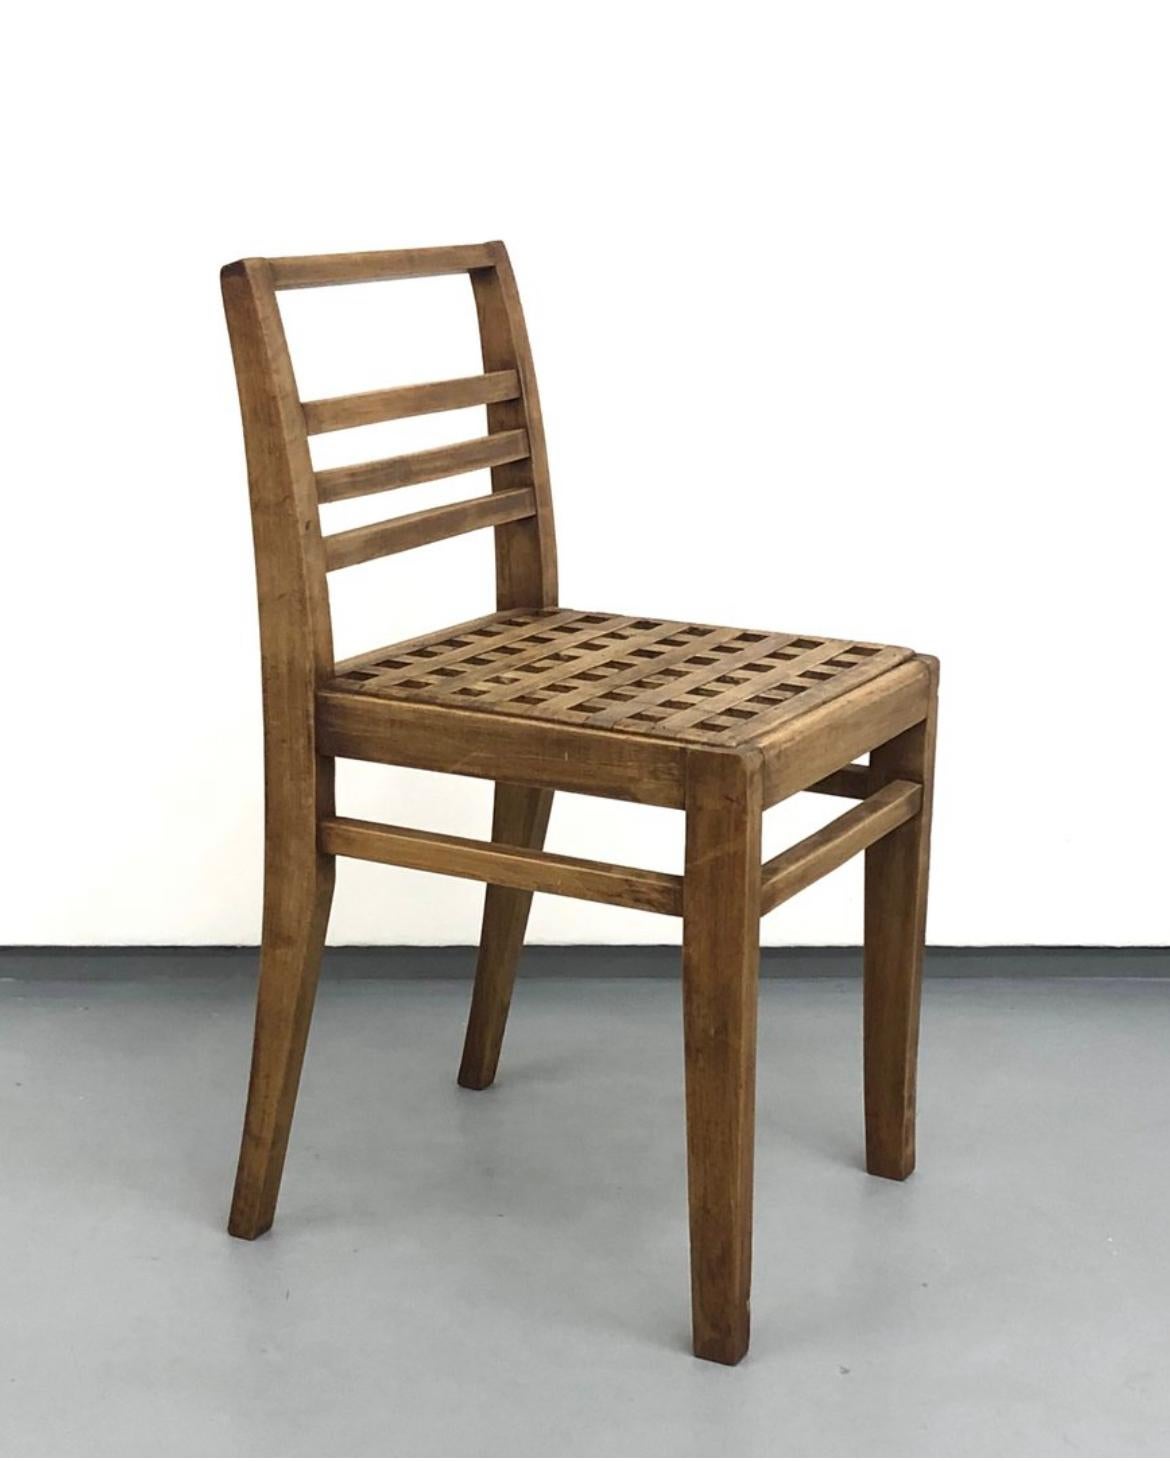 Pair of duckboard chairs model 103 in oak by René Gabriel, Norma, 1941

Set of 2 chairs in varnished stained oak with three slats back and duckboard seat designed by René Gabriel and published by Norma in 1941.

René Gabriel (1899 - 1950) is a